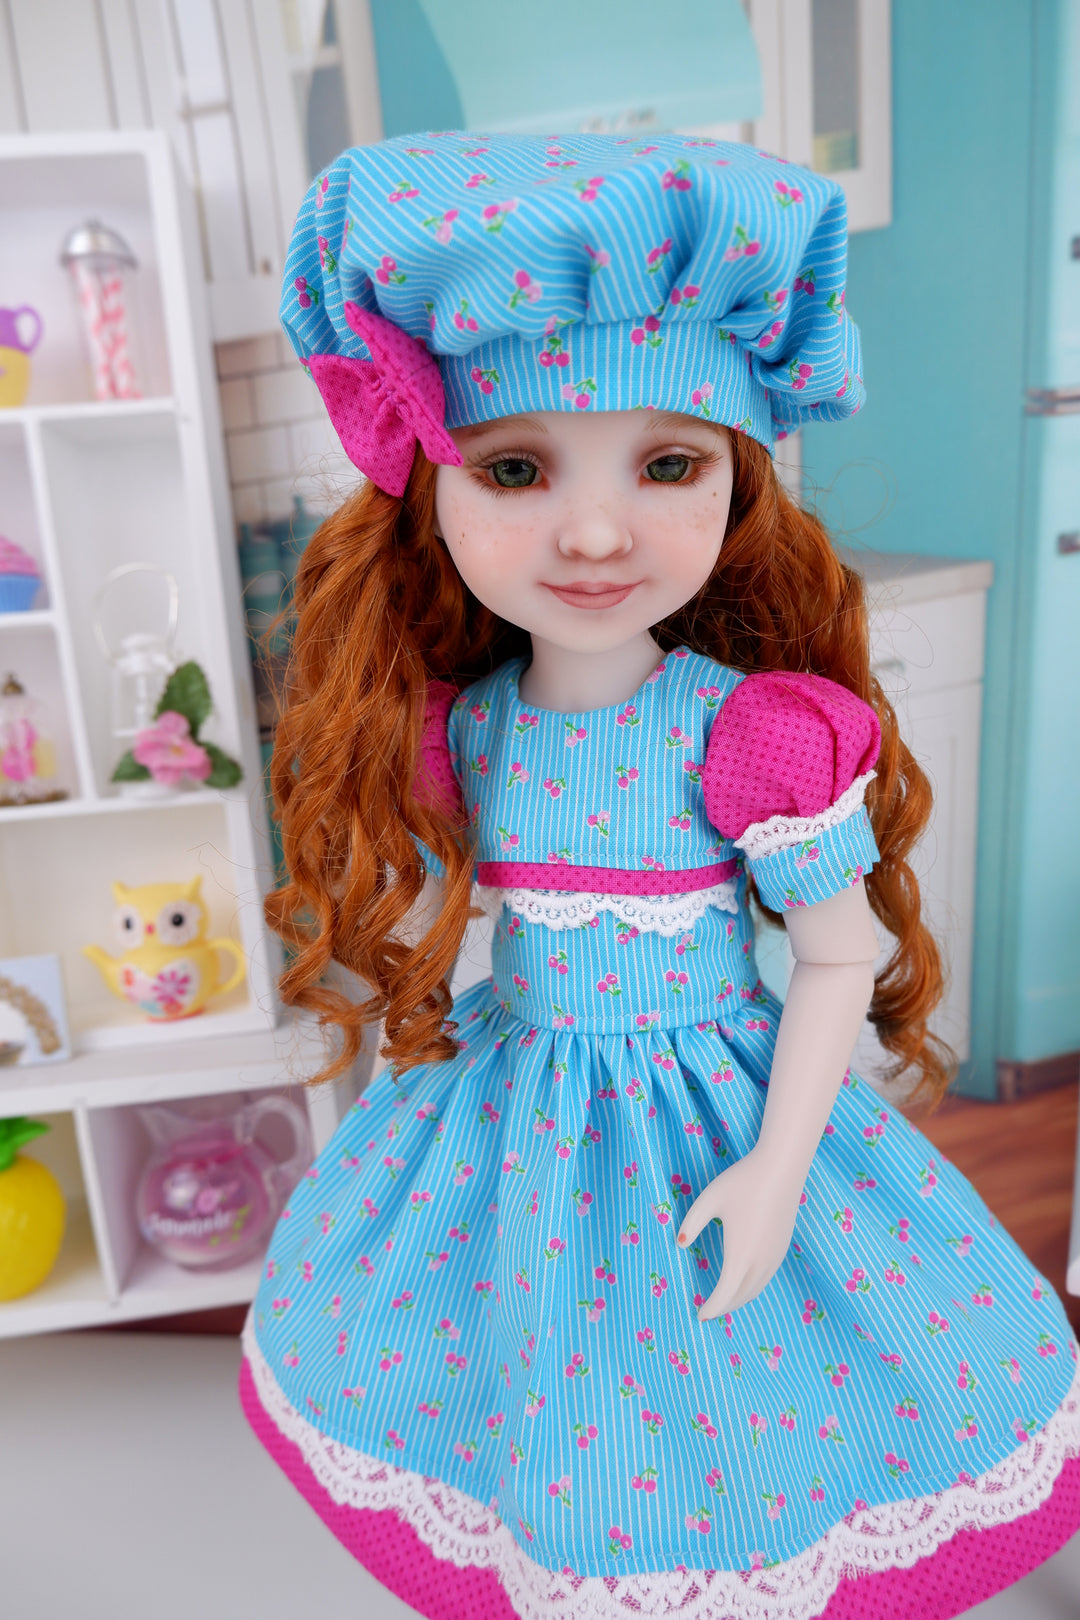 Bitty Cherries - dress and shoes for Ruby Red Fashion Friends doll